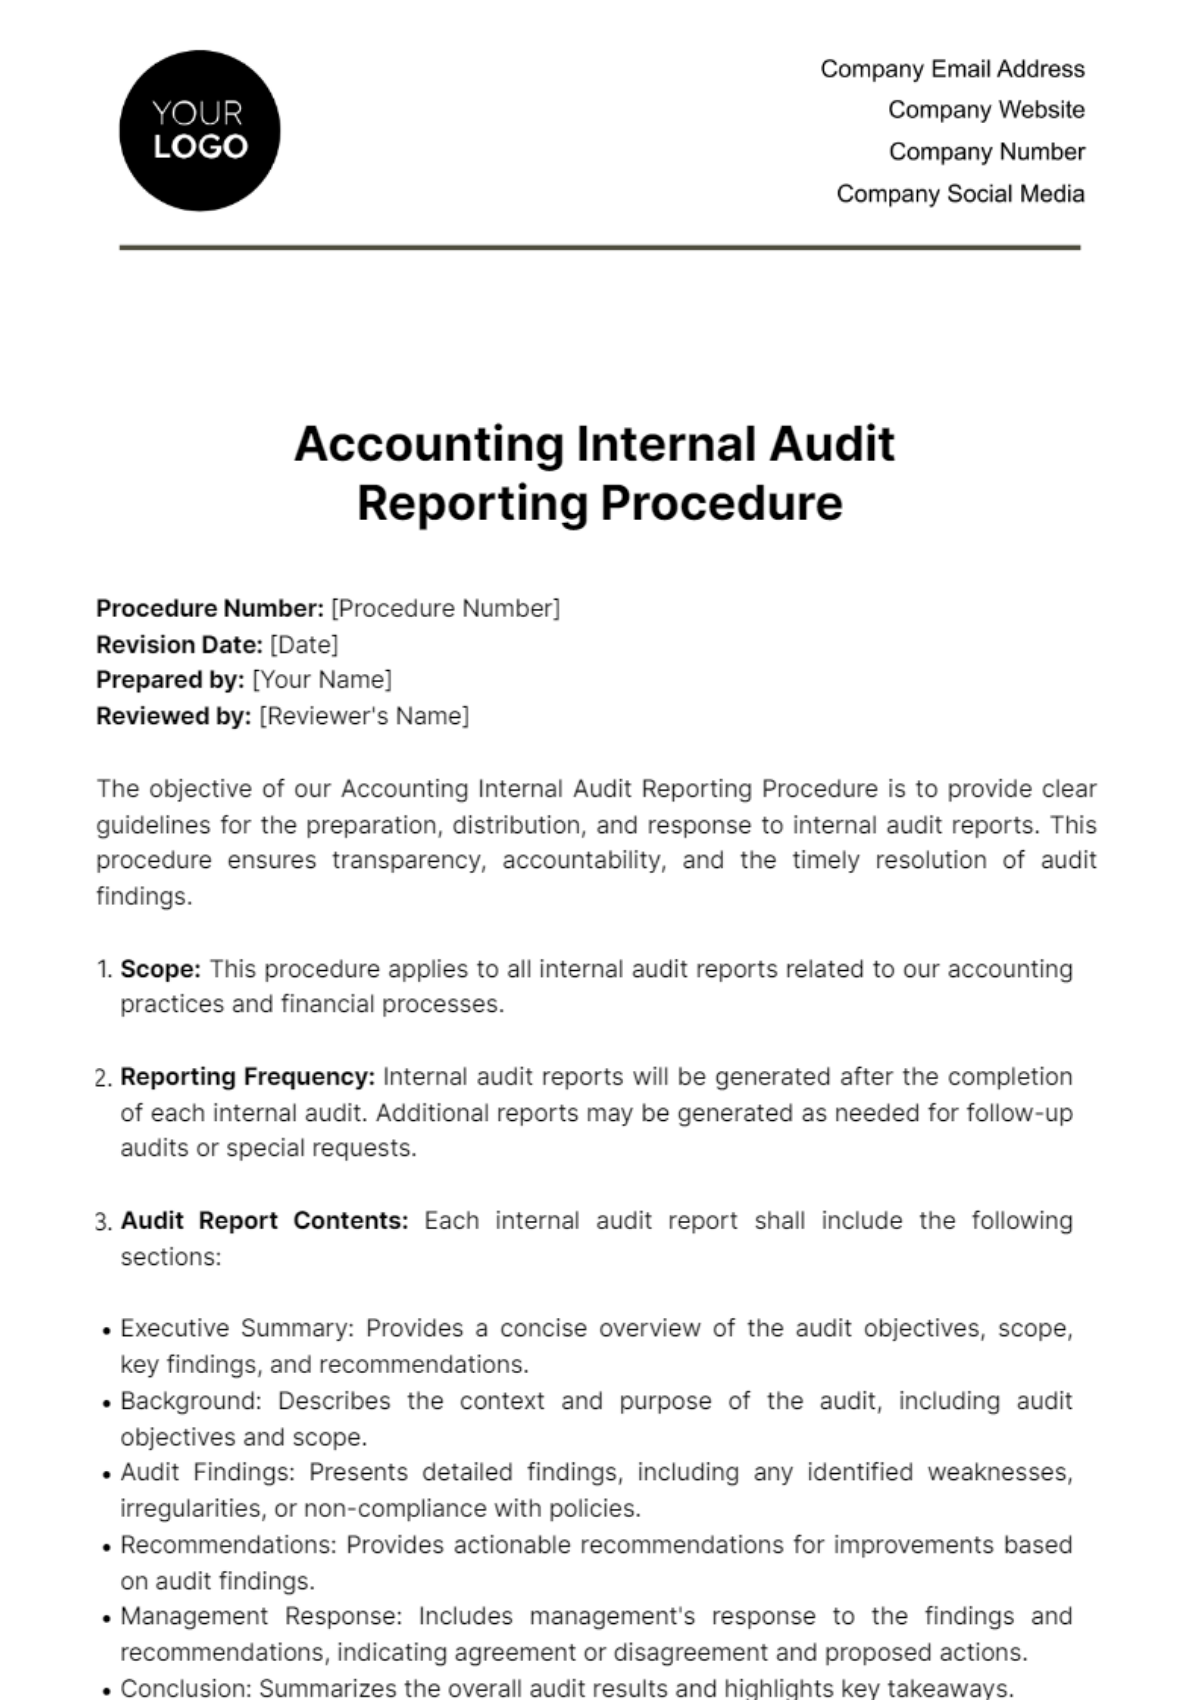 Free Accounting Internal Audit Reporting Procedure Template